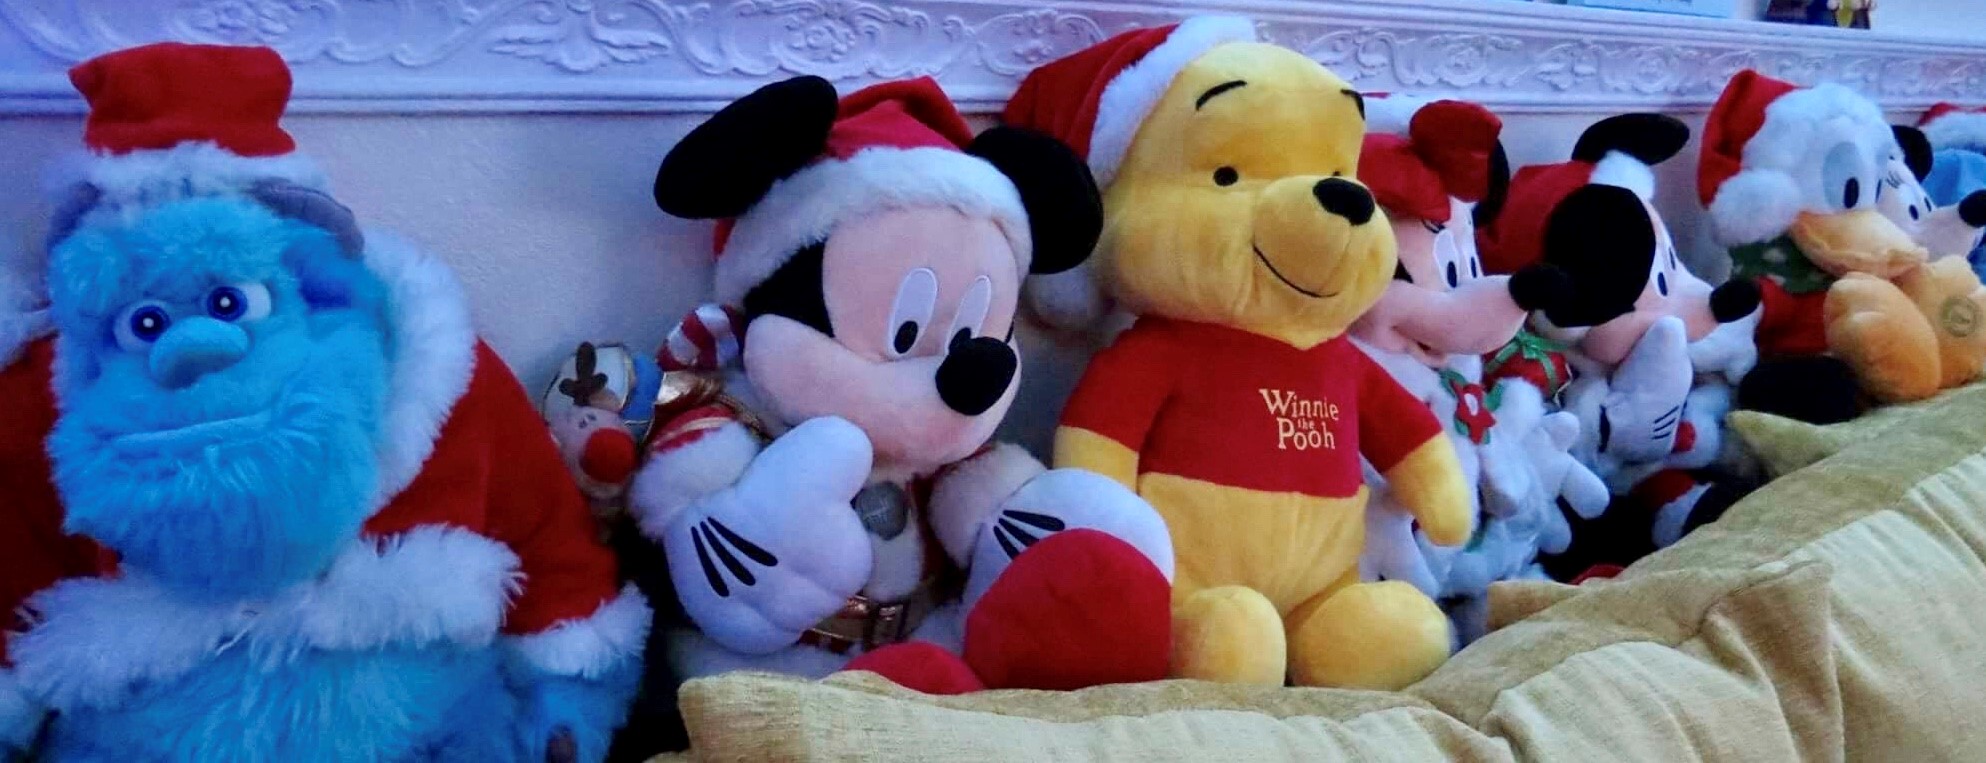 Debbie's Disney collection of soft toys